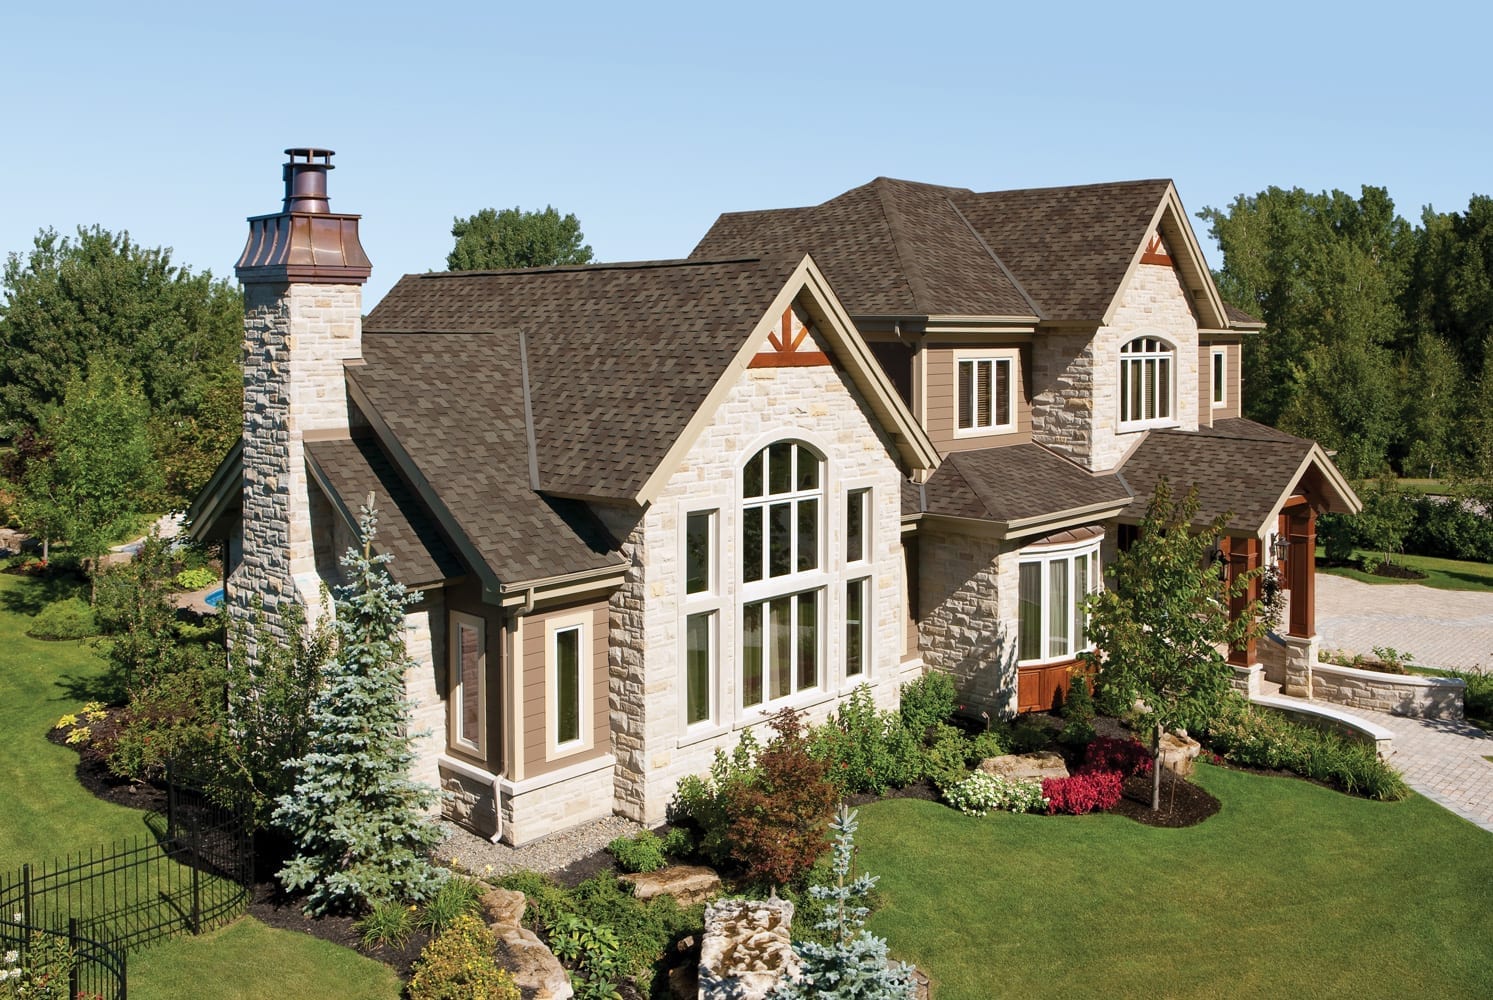 Asphalt shingle colors to match brown houses include grey, brown, black, green and possibly blue